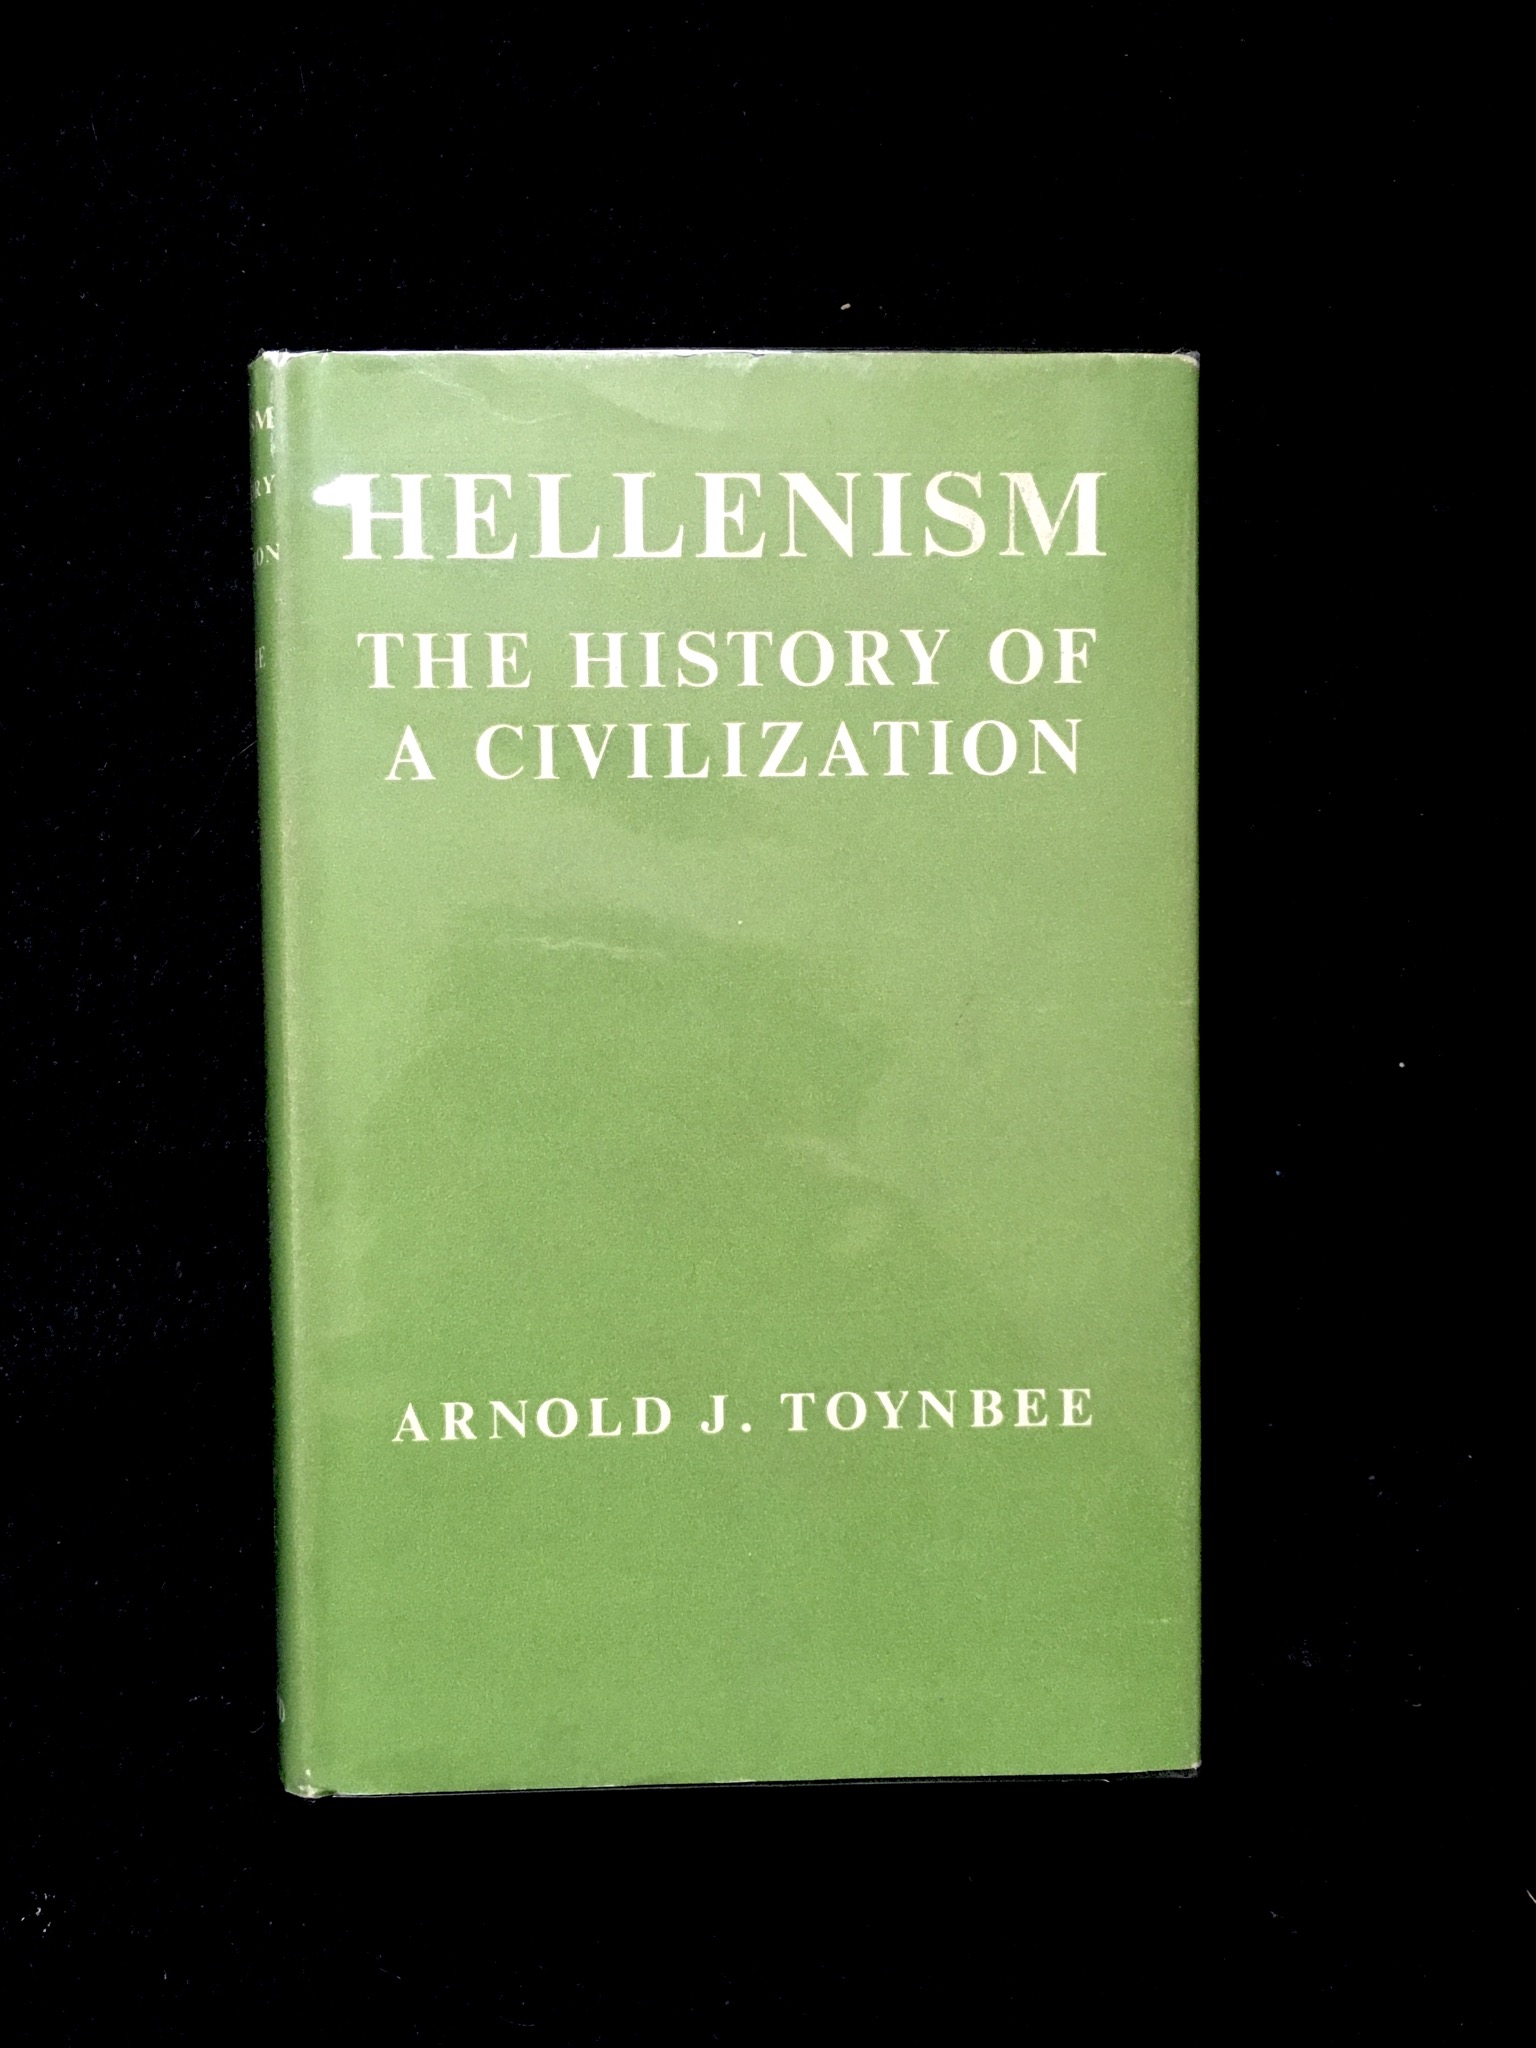 Hellenism The History of a Civilization by Arnold J. Toynbee